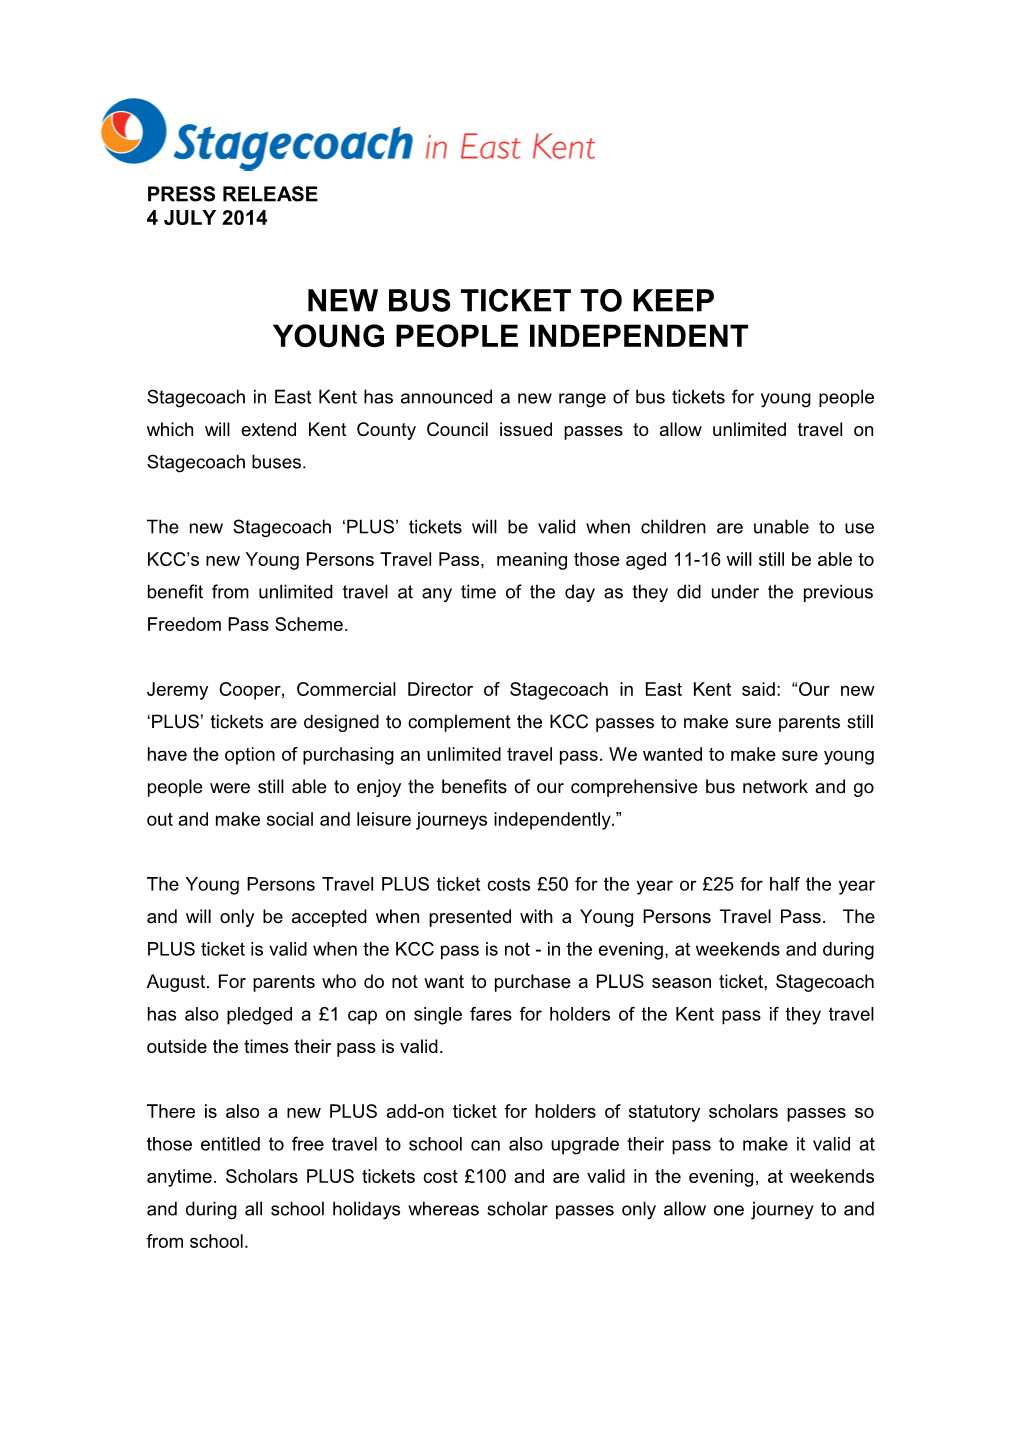 New Bus Ticket to Keep